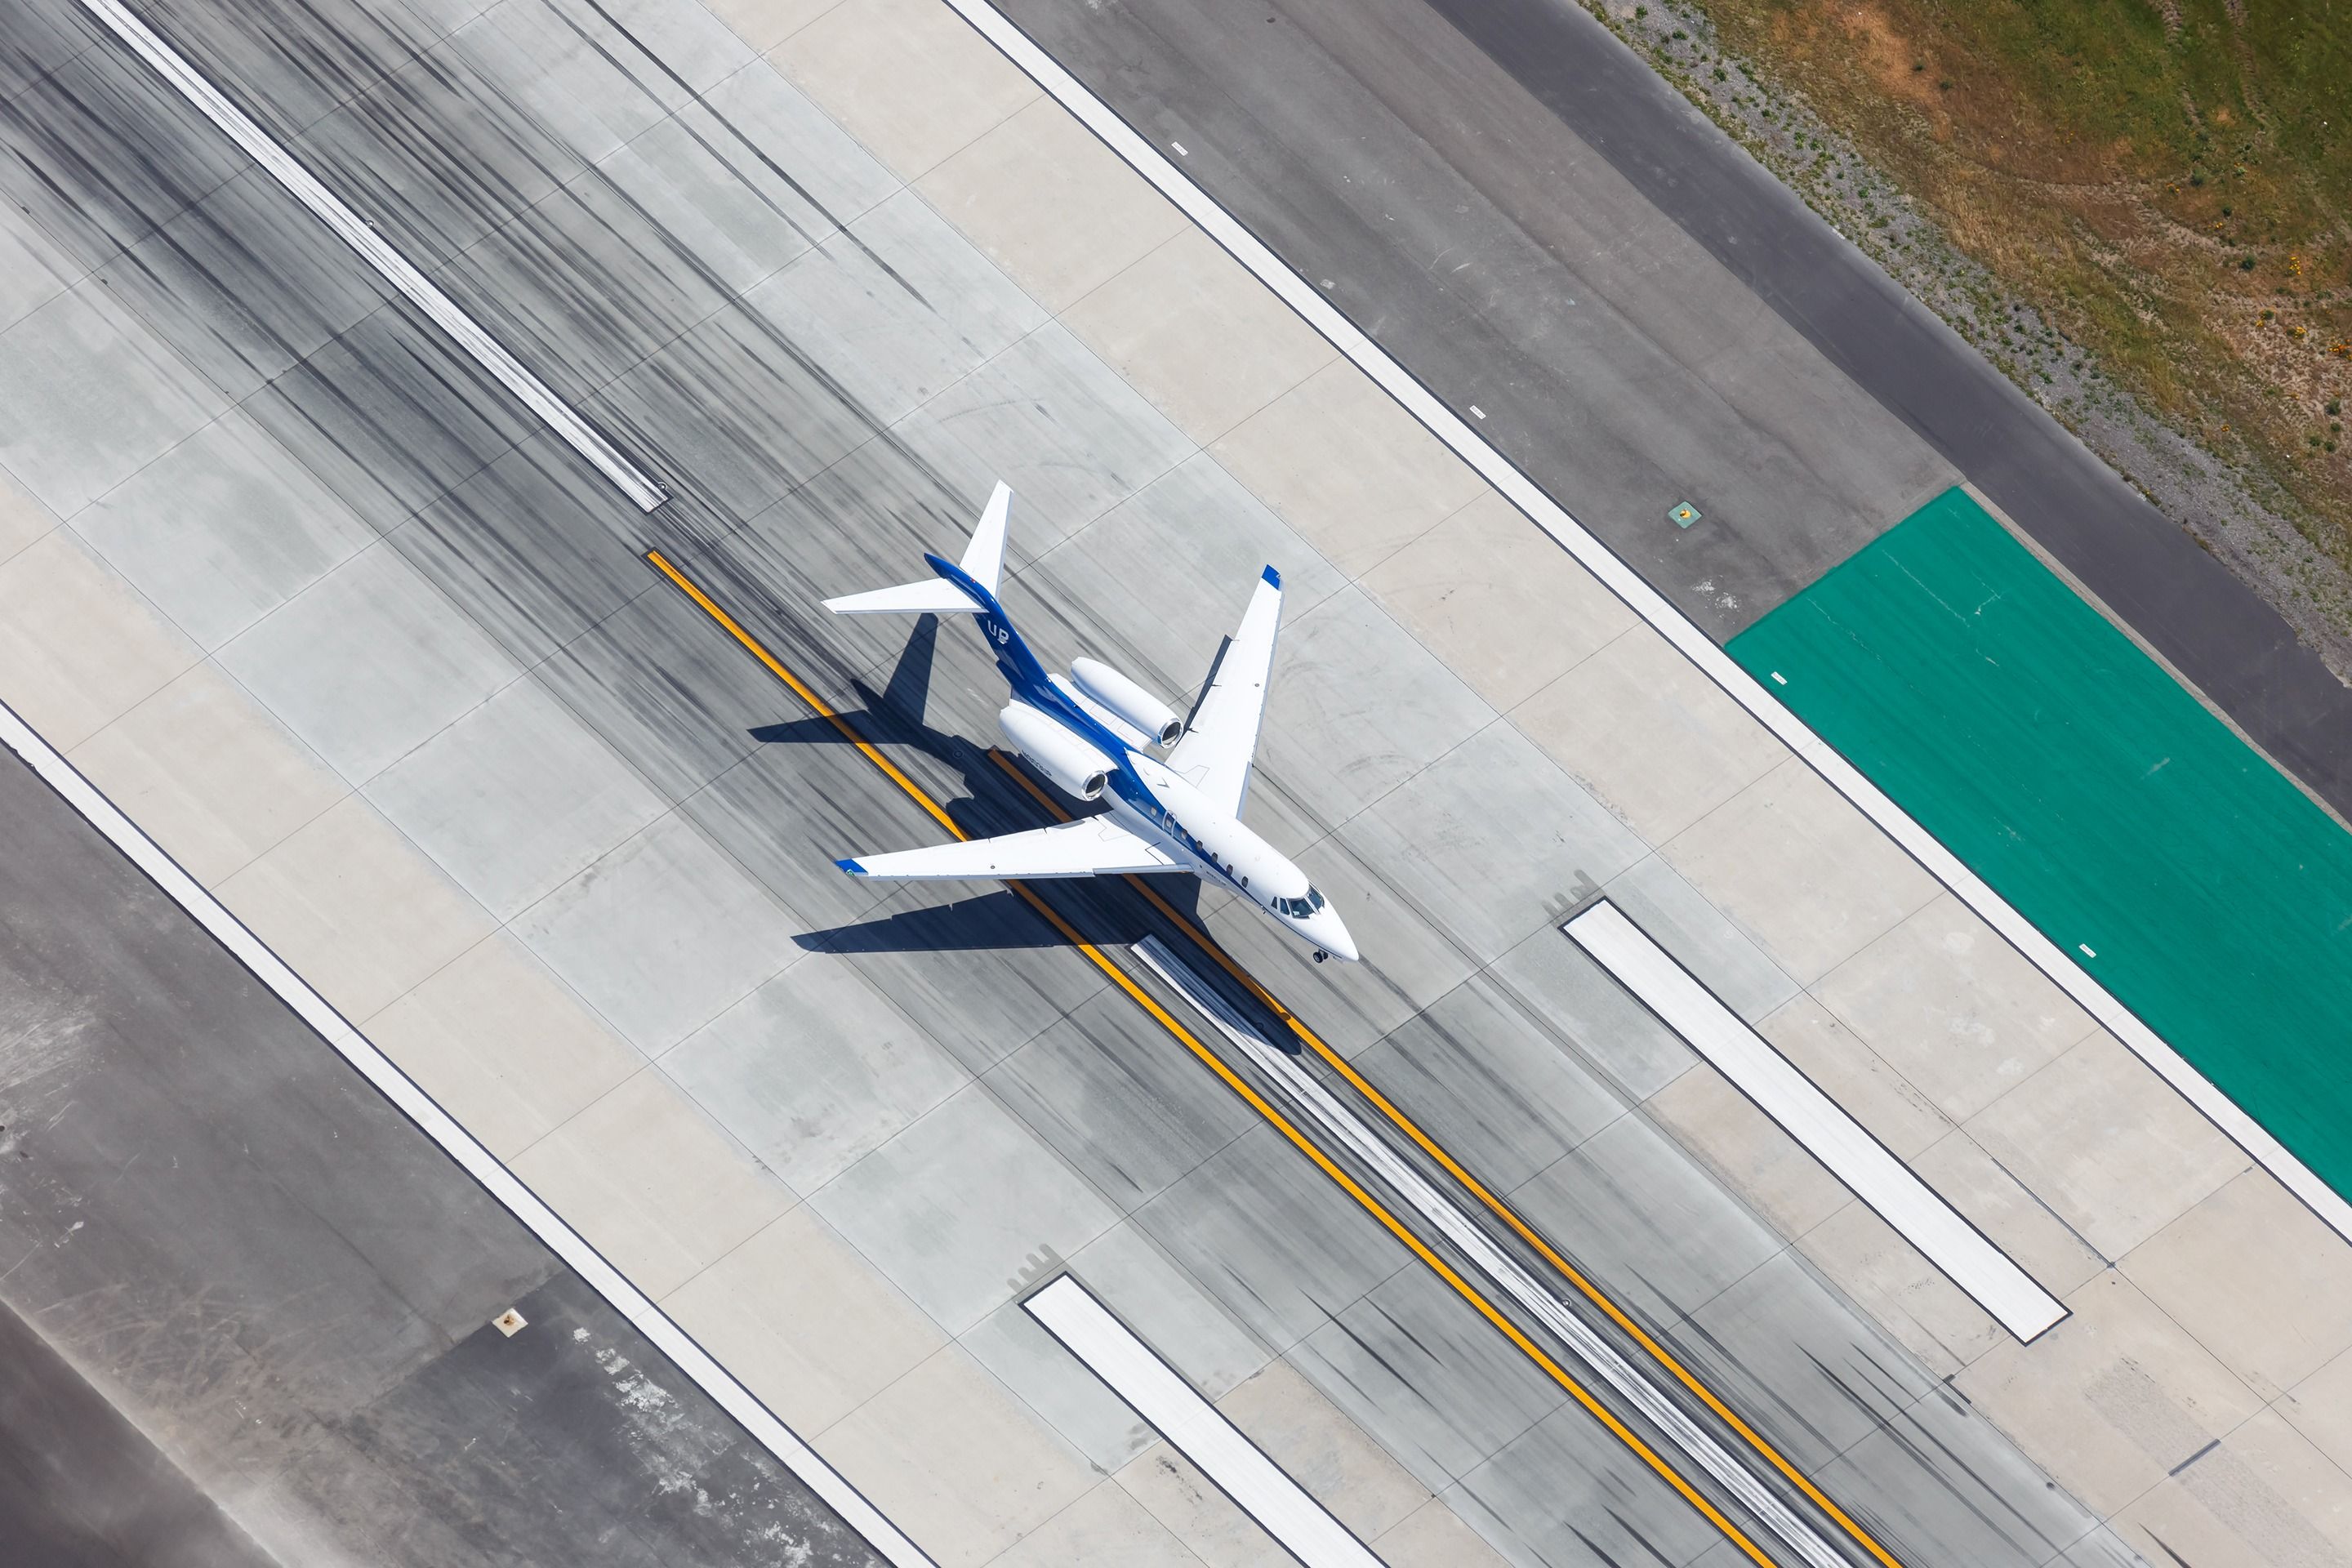 A Wheels Up Cessna Citation X about to land on a runway.